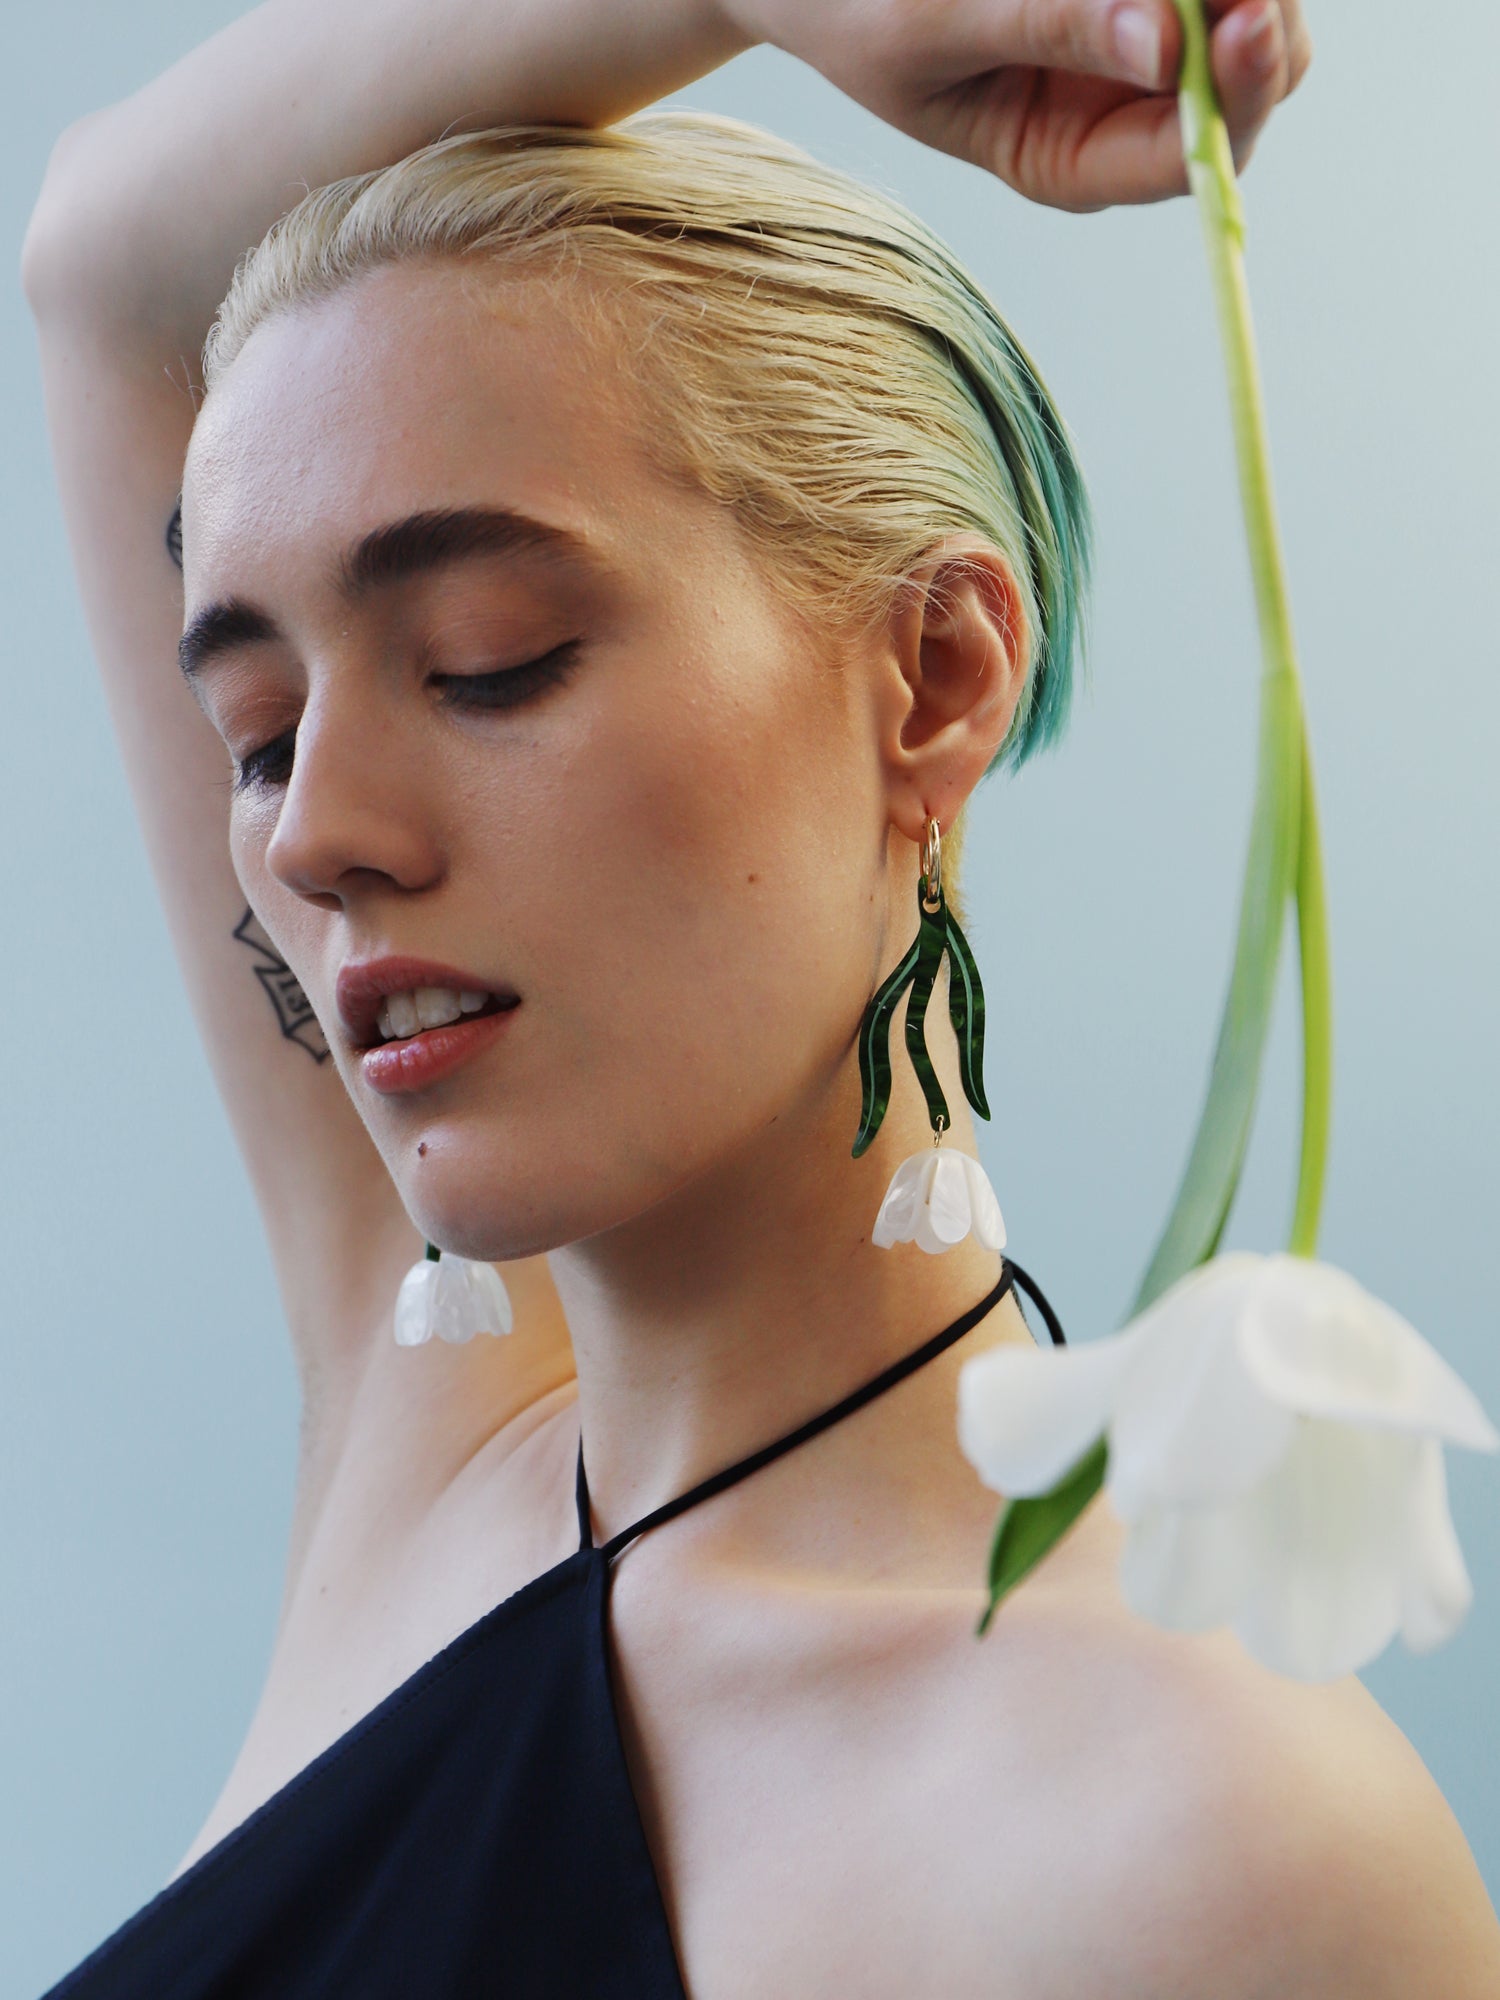 White & green sculptural tulip statement hoop earrings. Made from heat-formed acrylic with high quality glass pearls and 14k gold-filled findings. Handmade in the UK by Wolf & Moon.